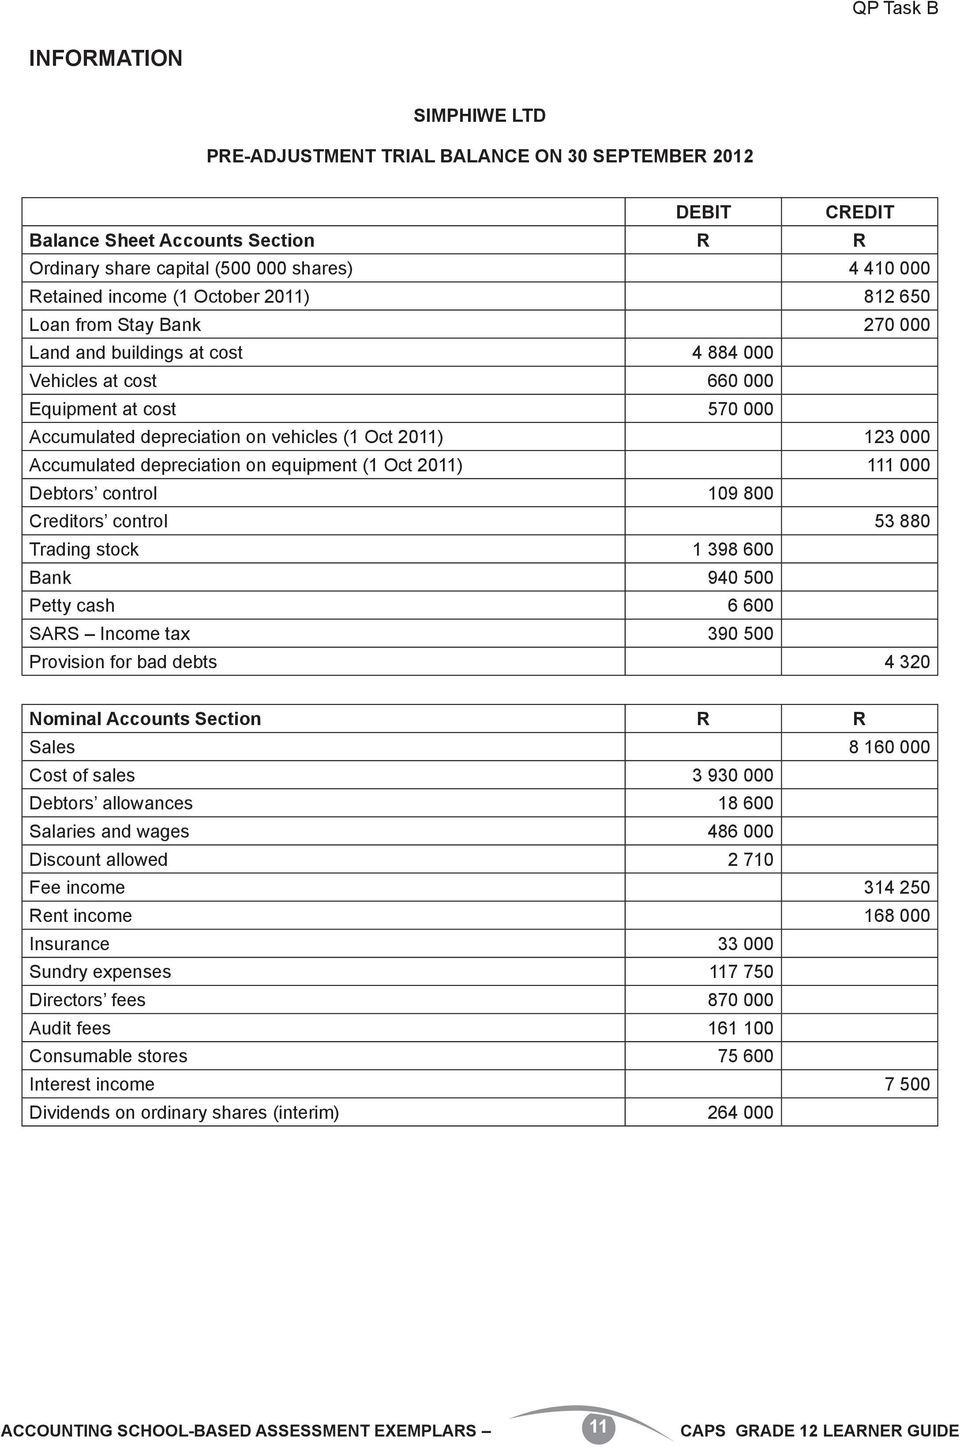 Accumulated depreciation on equipment (1 Oct 2011) 111 000 Debtors control 109 800 Creditors control 53 880 Trading stock 1 398 600 Bank 940 500 Petty cash 6 600 SARS Income tax 390 500 Provision for